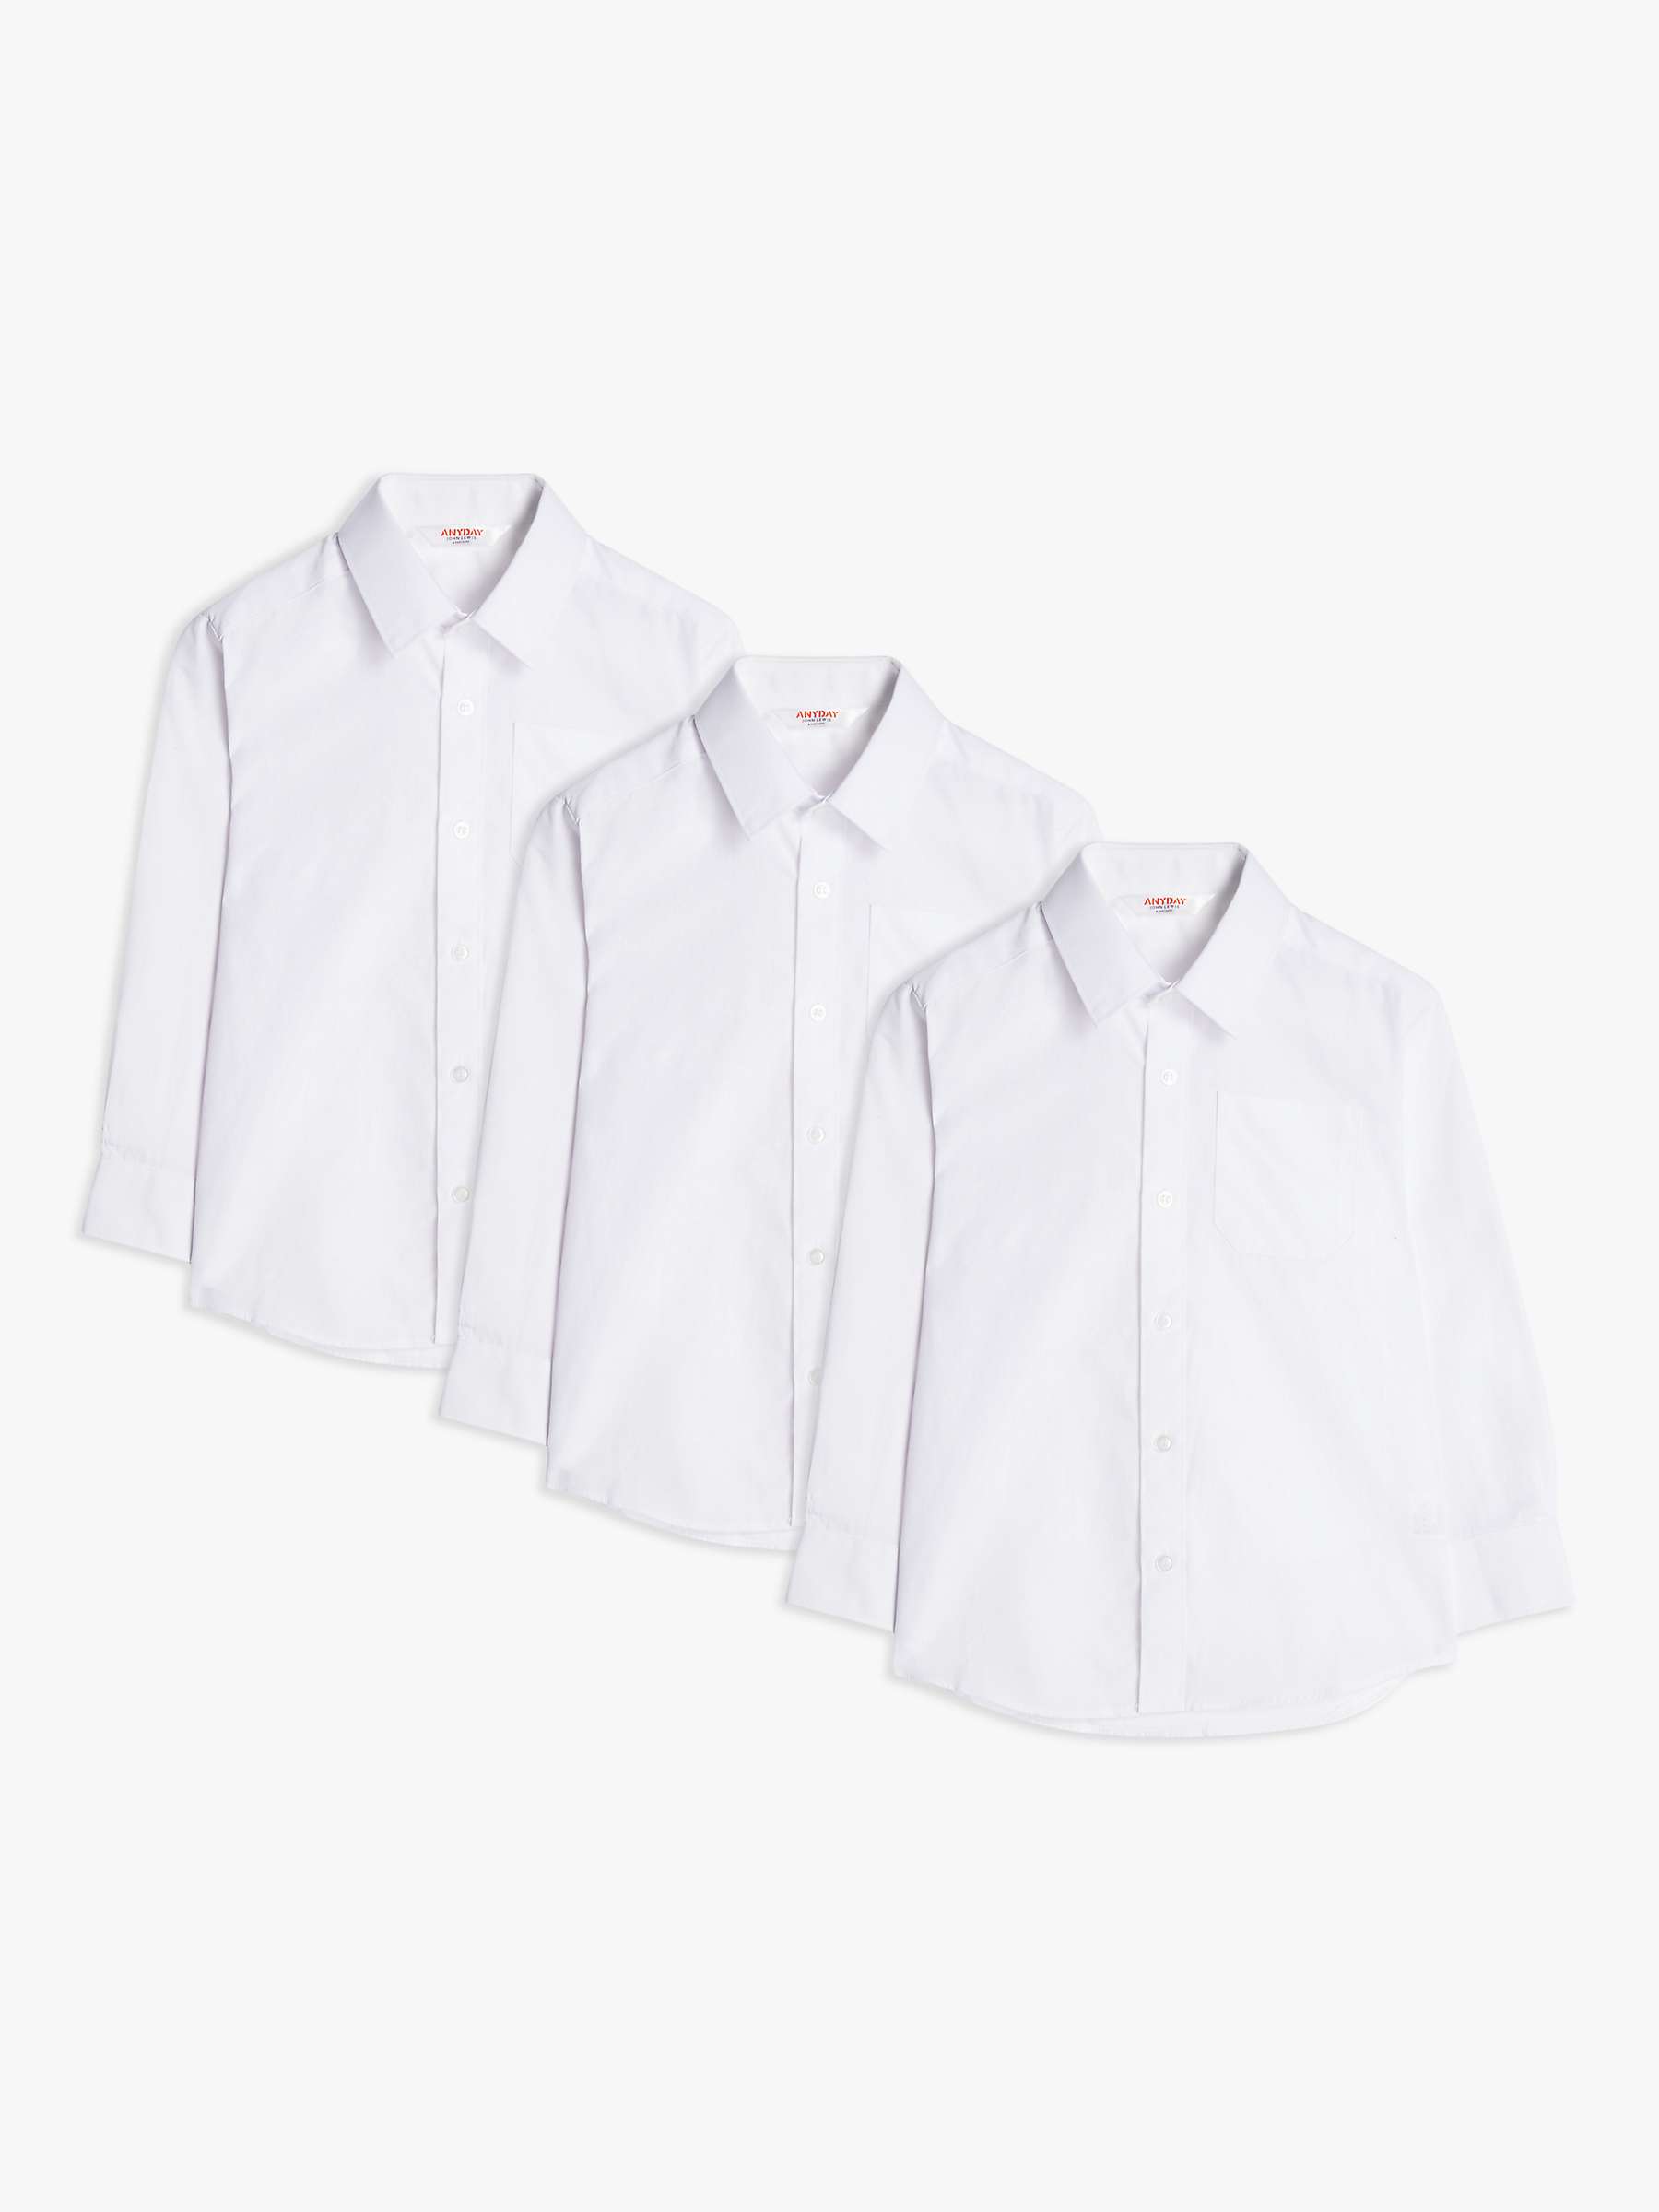 Buy John Lewis ANYDAY Long Sleeved Shirt, Pack of 3, White Online at johnlewis.com